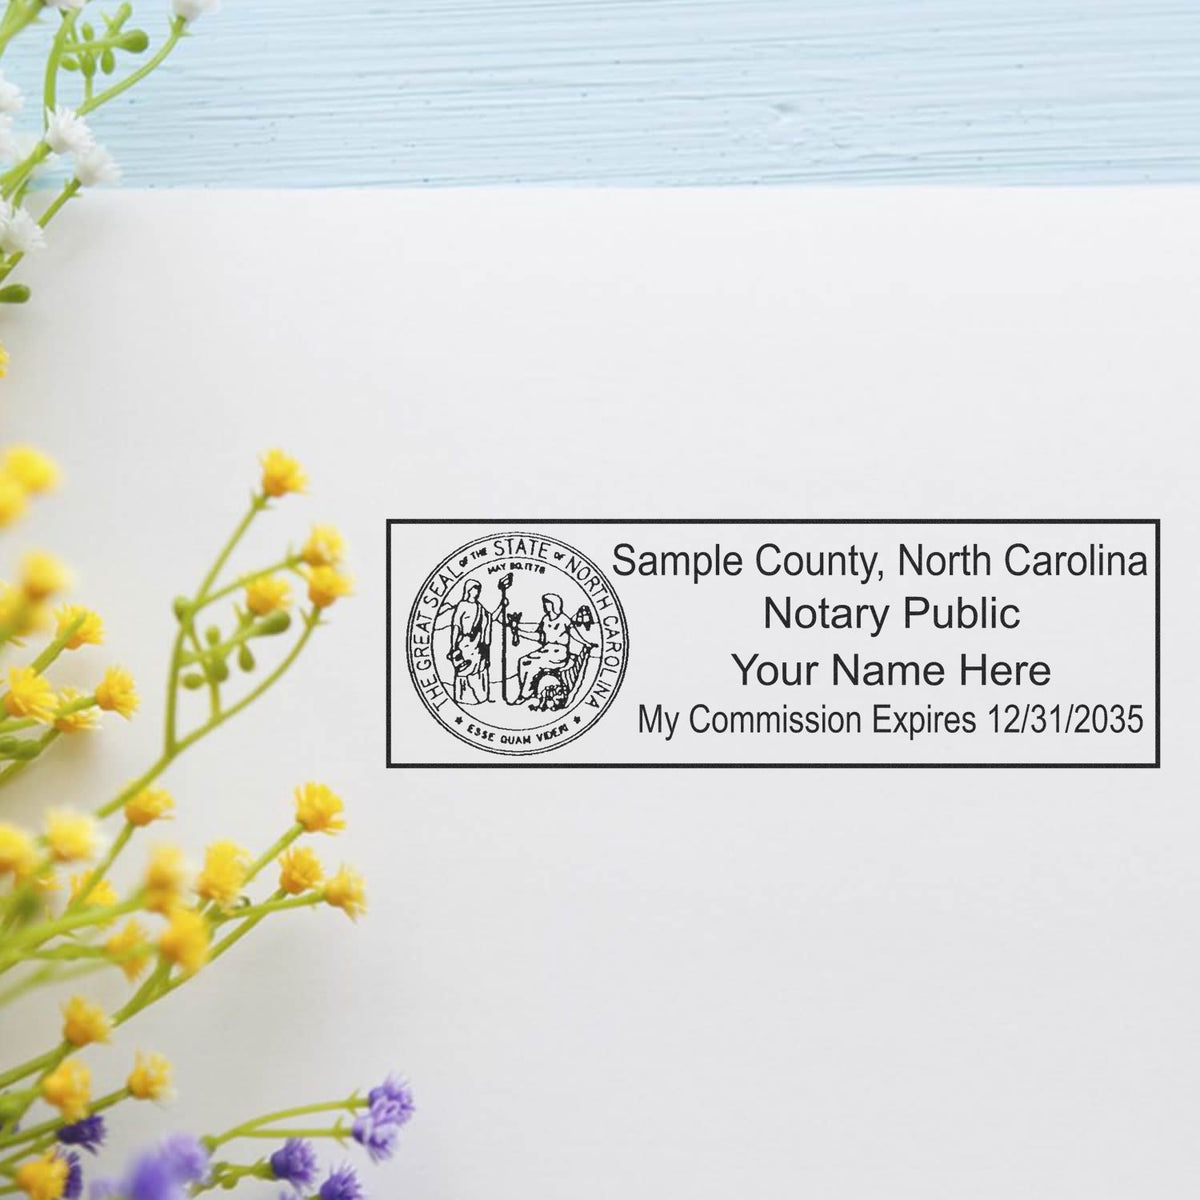 The Slim Pre-Inked State Seal Notary Stamp for North Carolina stamp impression comes to life with a crisp, detailed photo on paper - showcasing true professional quality.